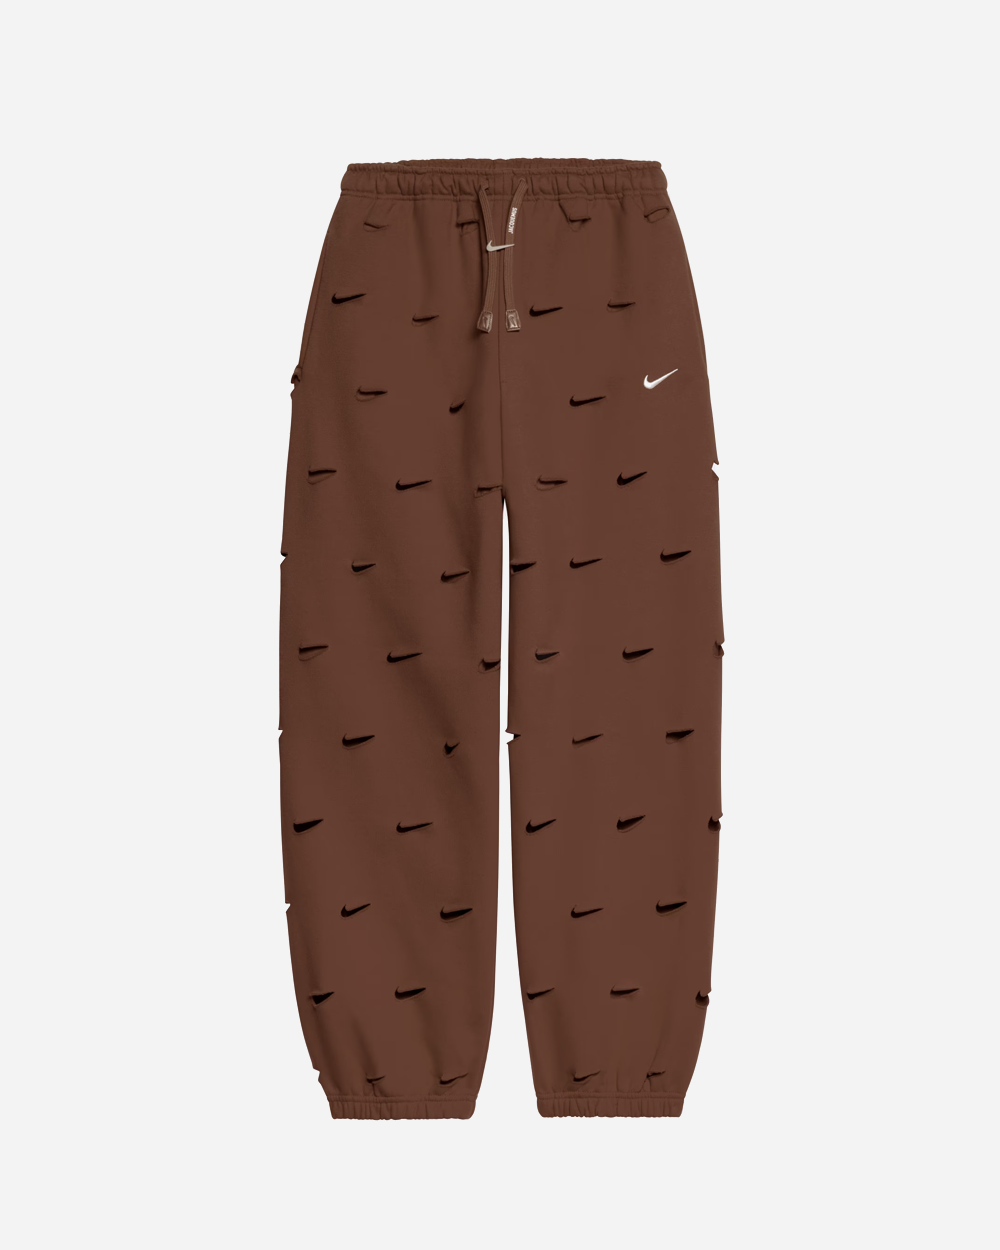 Jacquemus x Nike Track Pants Cacao Wow